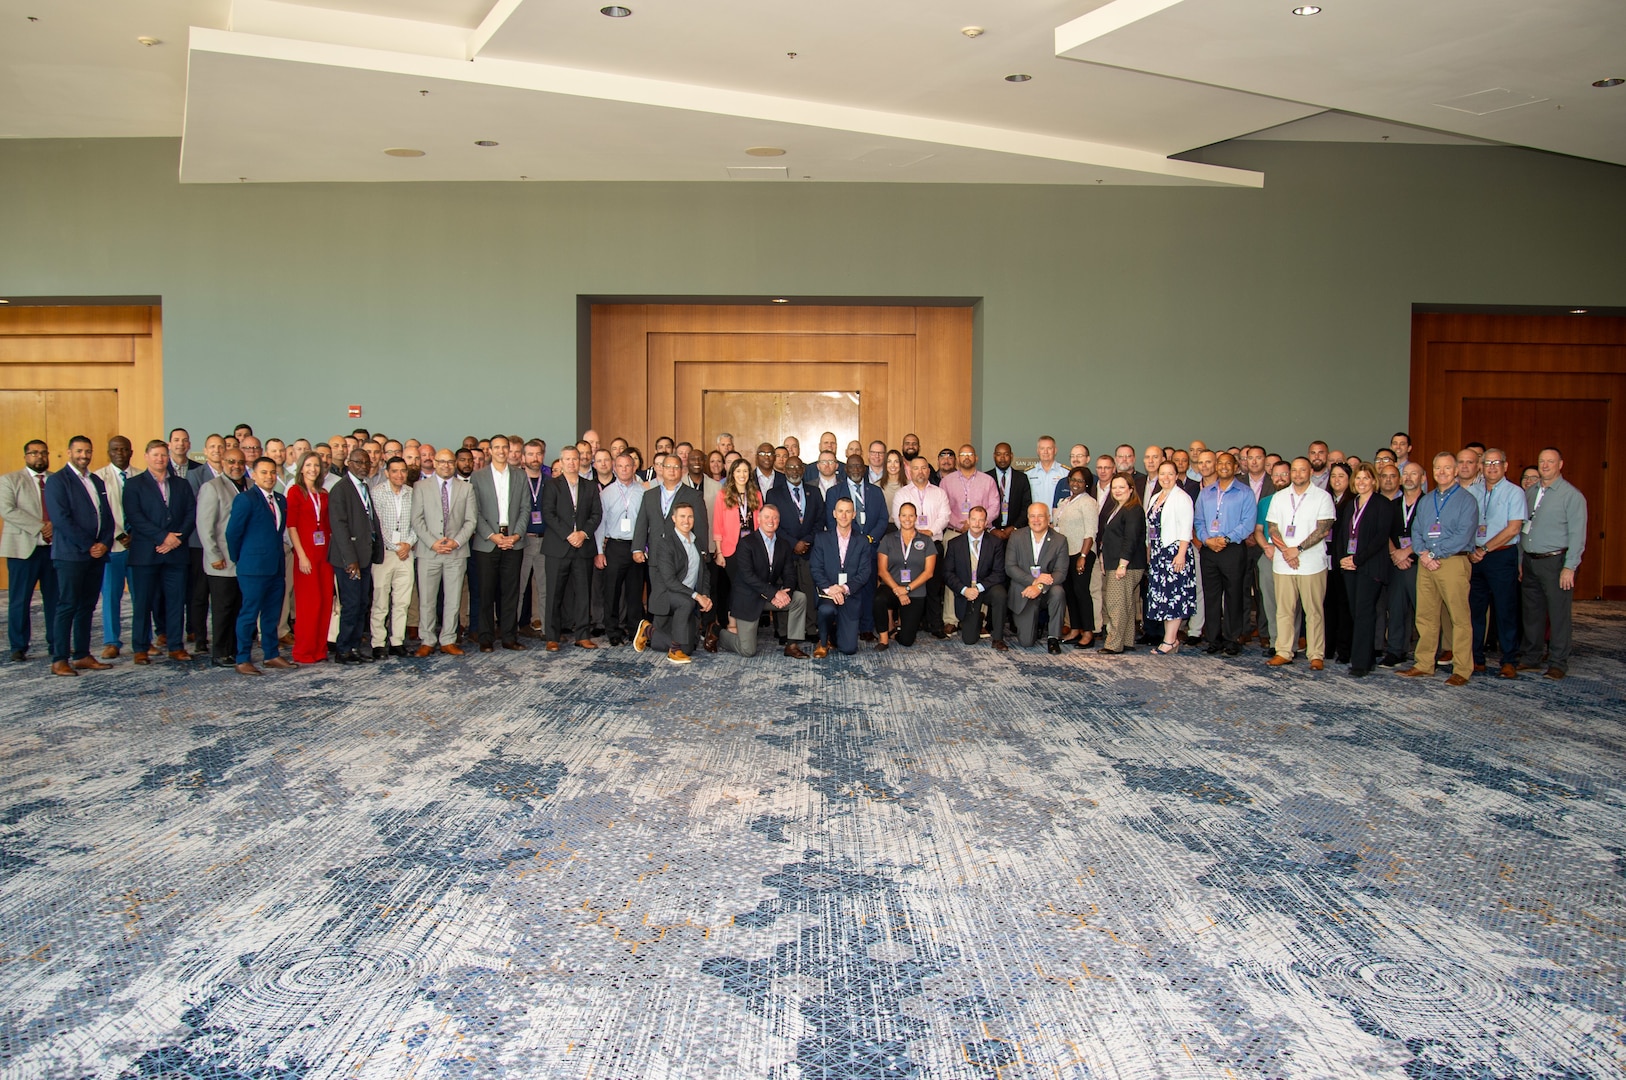 The Eastern Caribbean Combined Coordination Group (ECCG) holds a meeting April 23-25, in San Juan, Puerto Rico. The ECCG is comprised of U.S. interagency and international partners with diverse expertise and authorities necessary to deepen cooperation across myriad jurisdictions and against the broad spectrum of threats and challenges in Eastern Caribbean region.